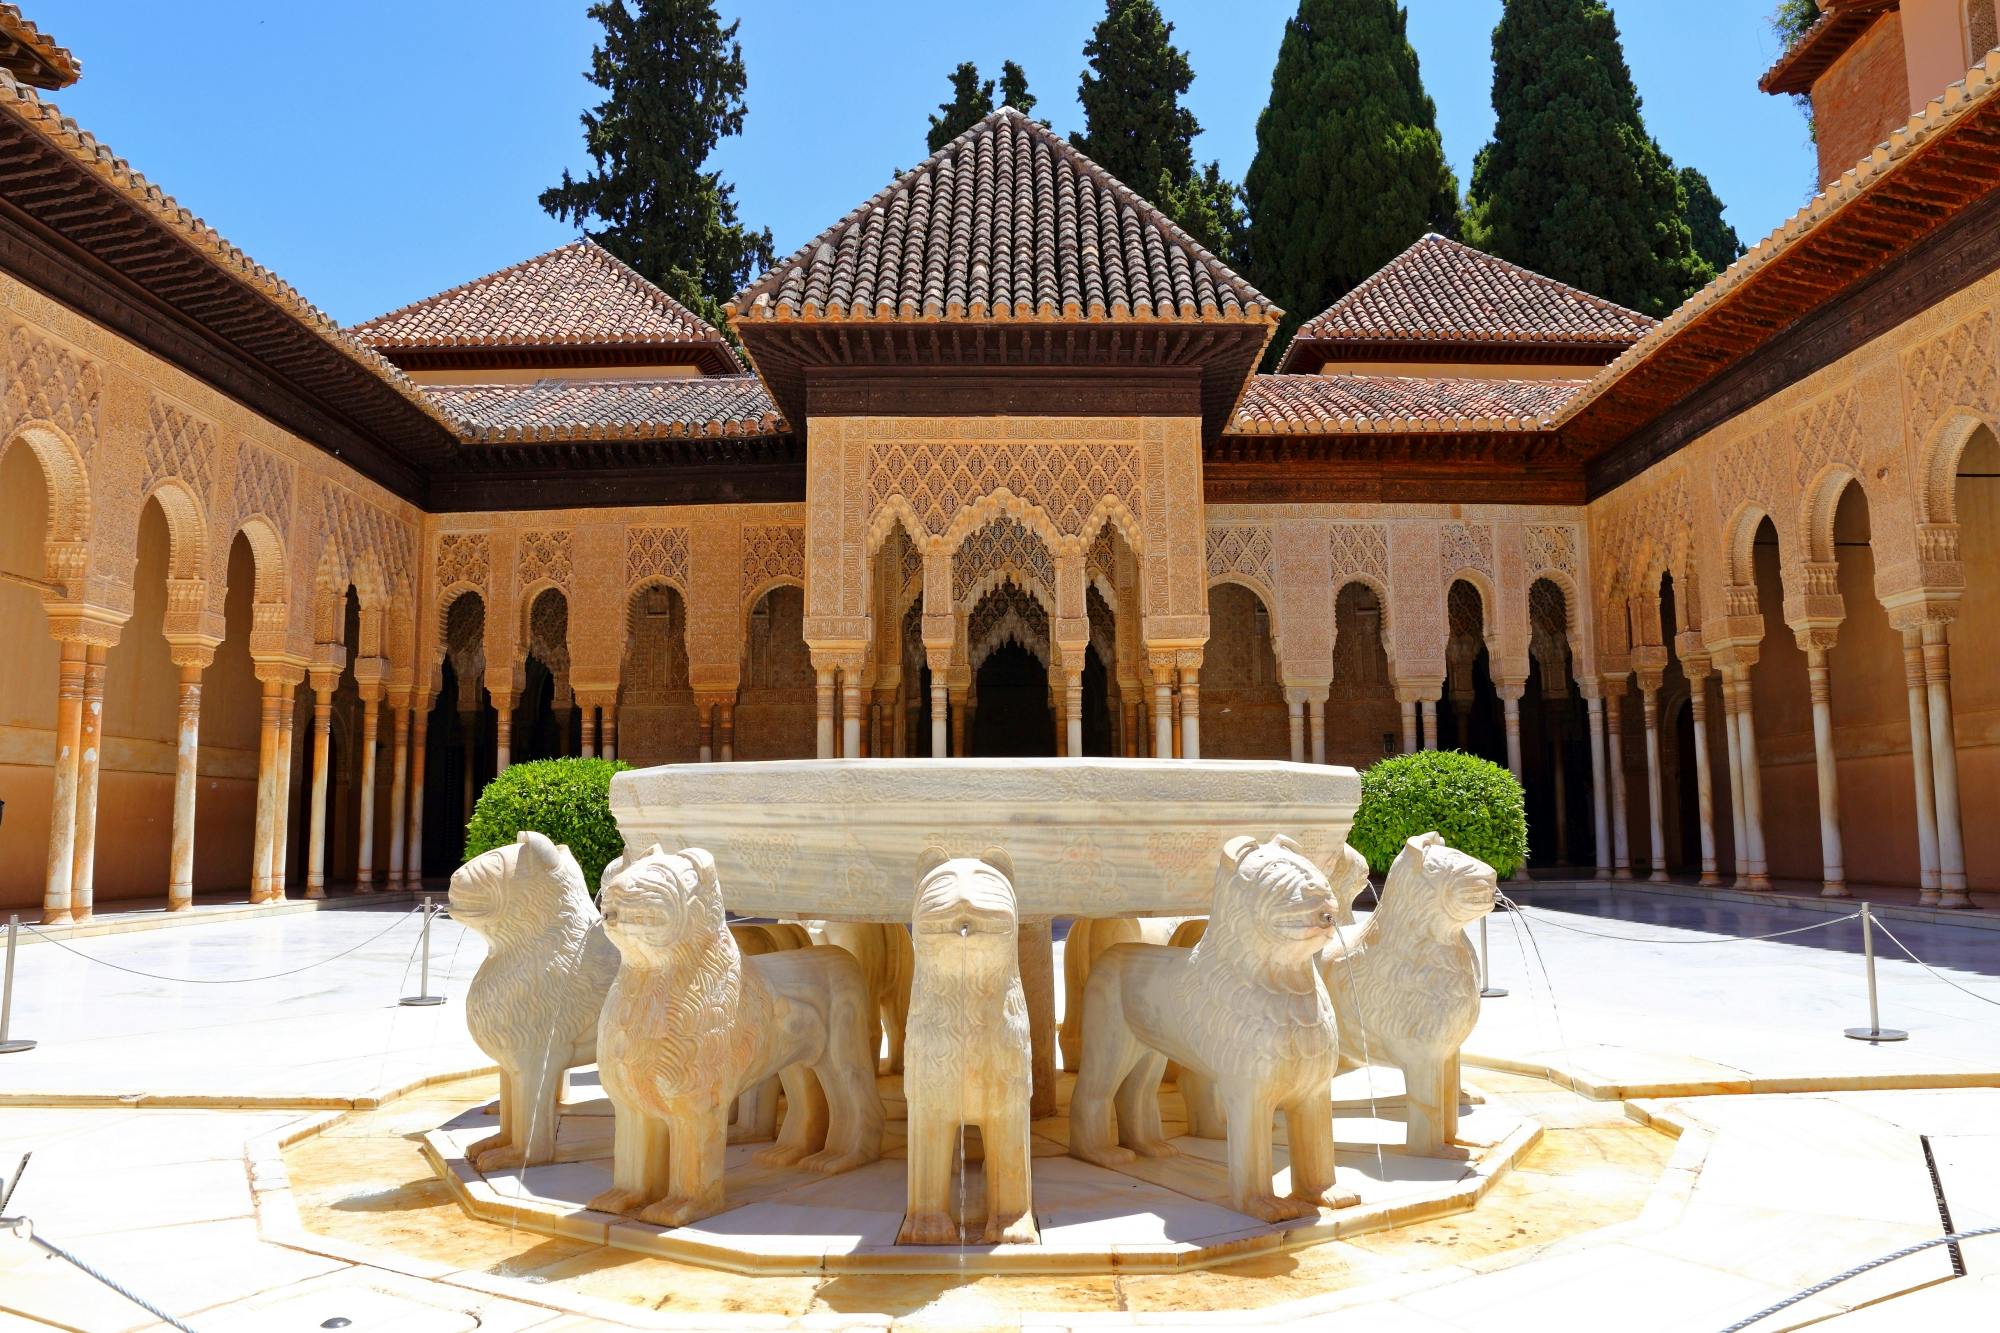 Alhambra complete access with skip-the-line tickets and guided tour in Italian